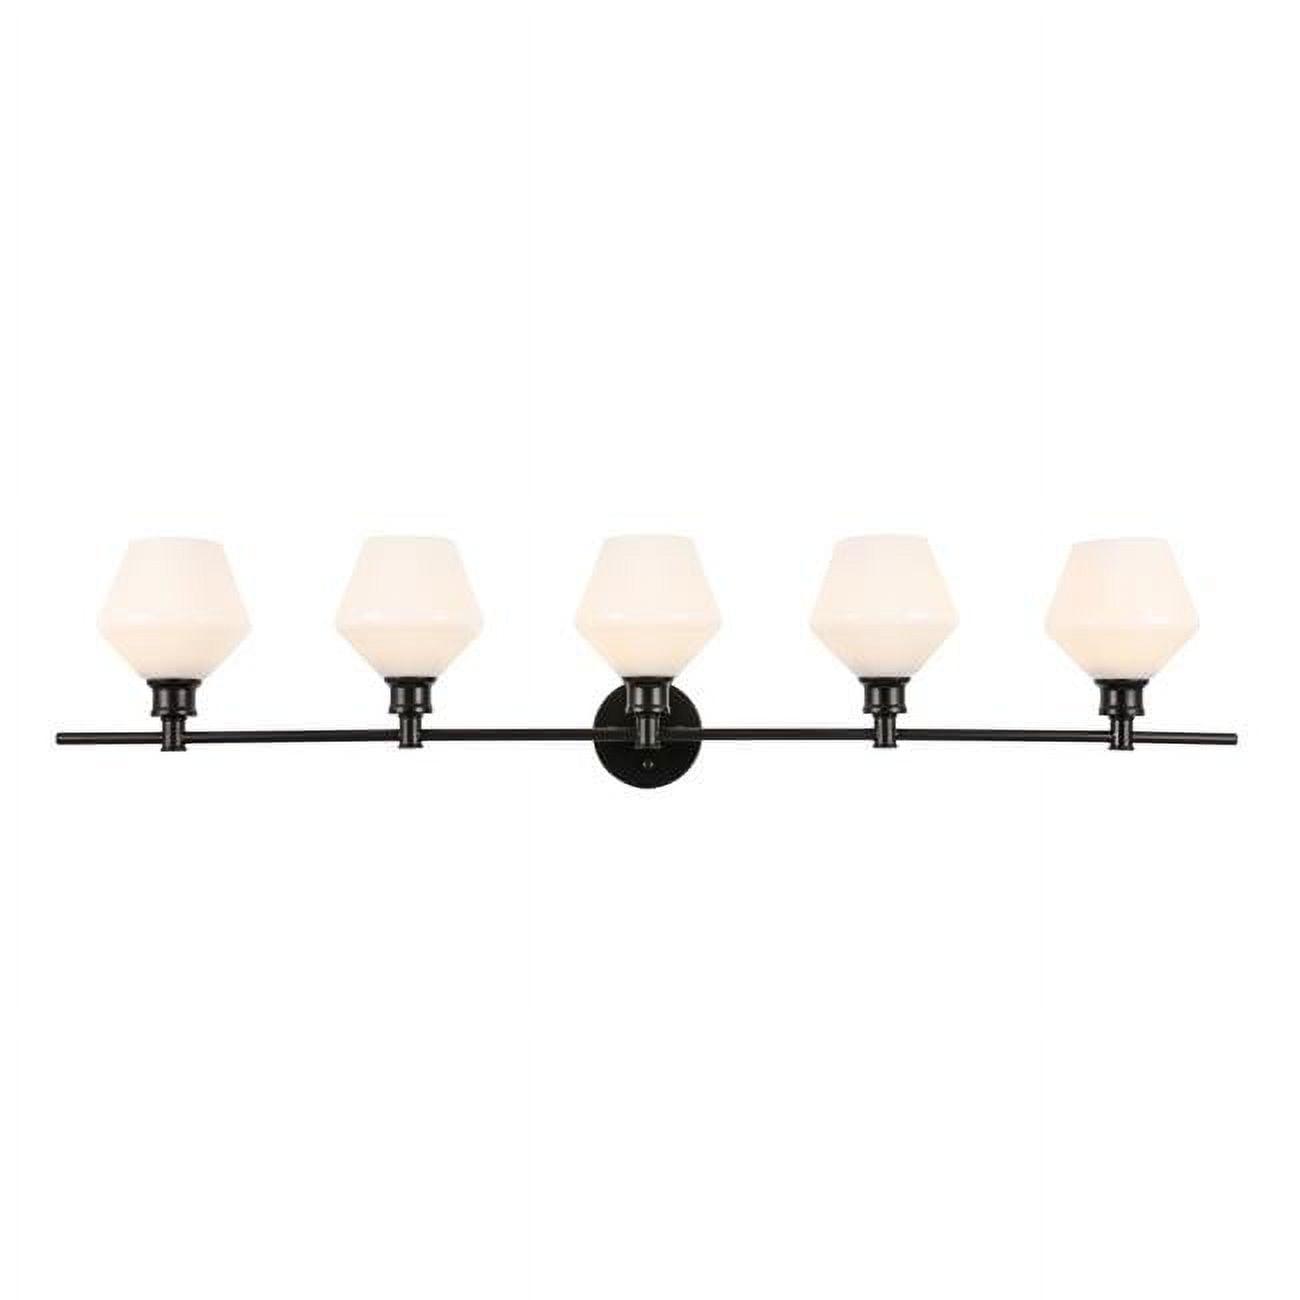 Gene 5-Light Industrial Black Wall Sconce with Frosted White Glass